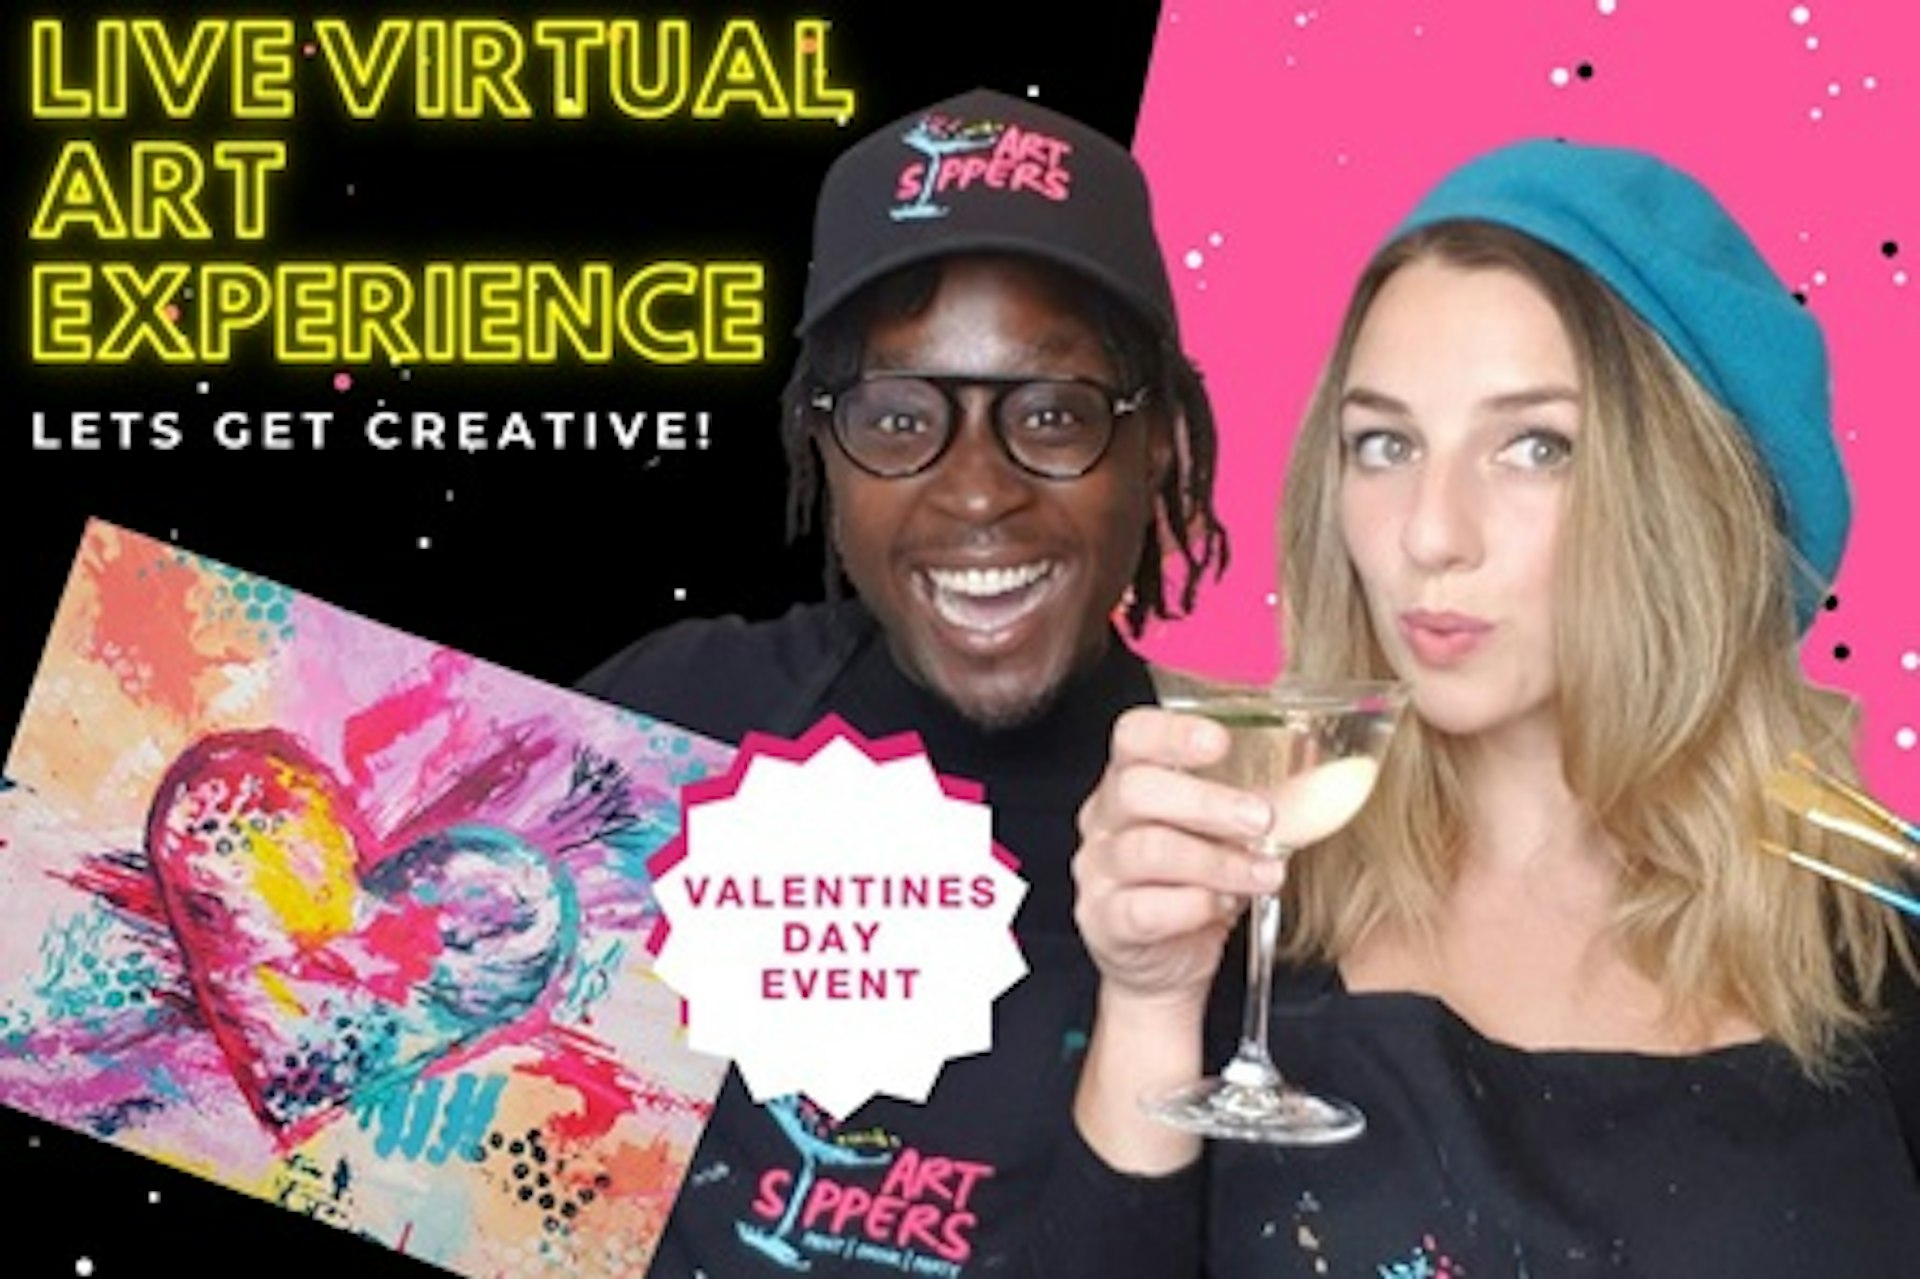 Get Creative Together - Date Night Live Virtual Art Experience with Drinks for Two with Art Sippers 1